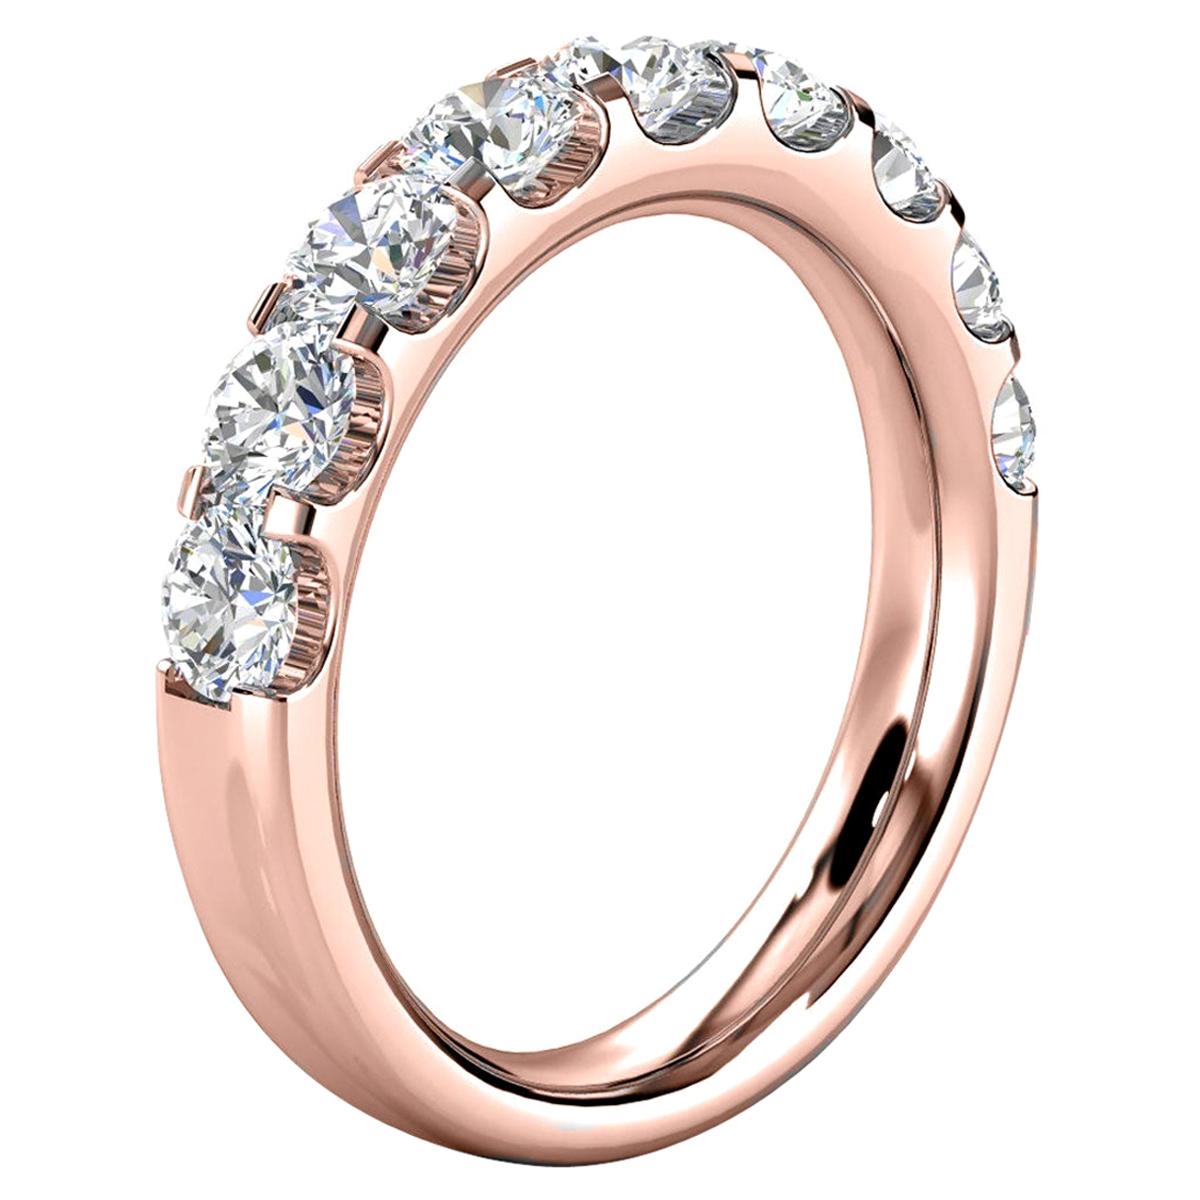 For Sale:  14K Rose Gold Valerie Micro-Prong Diamond Ring '1 1/2 Ct. Tw'